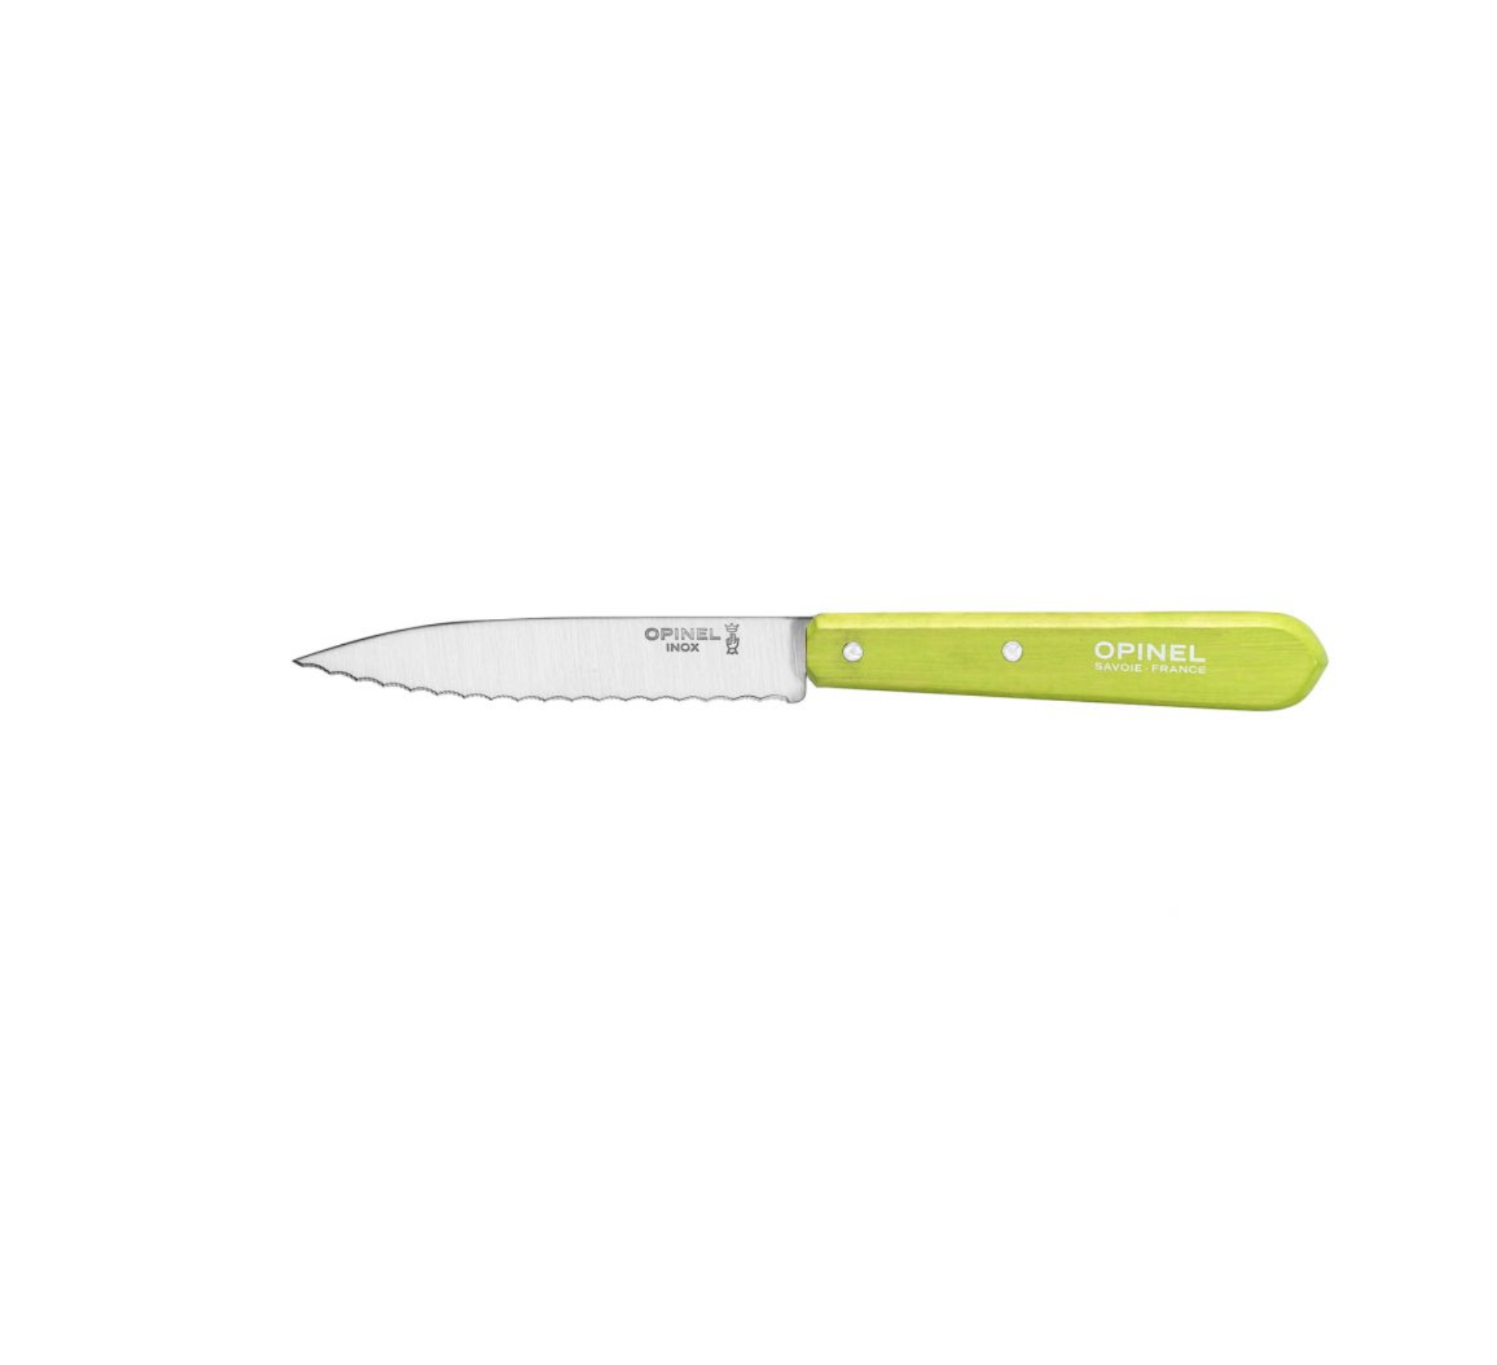 OPINEL 113 COUTEAU CRANTE GREEN INOX HOOD COUPE DECOUPE CUISINE 3123840019203 HOME COOKING KITCHEN NATURE INOX HOOD COMASOUND KARTEL CSK ONLINE